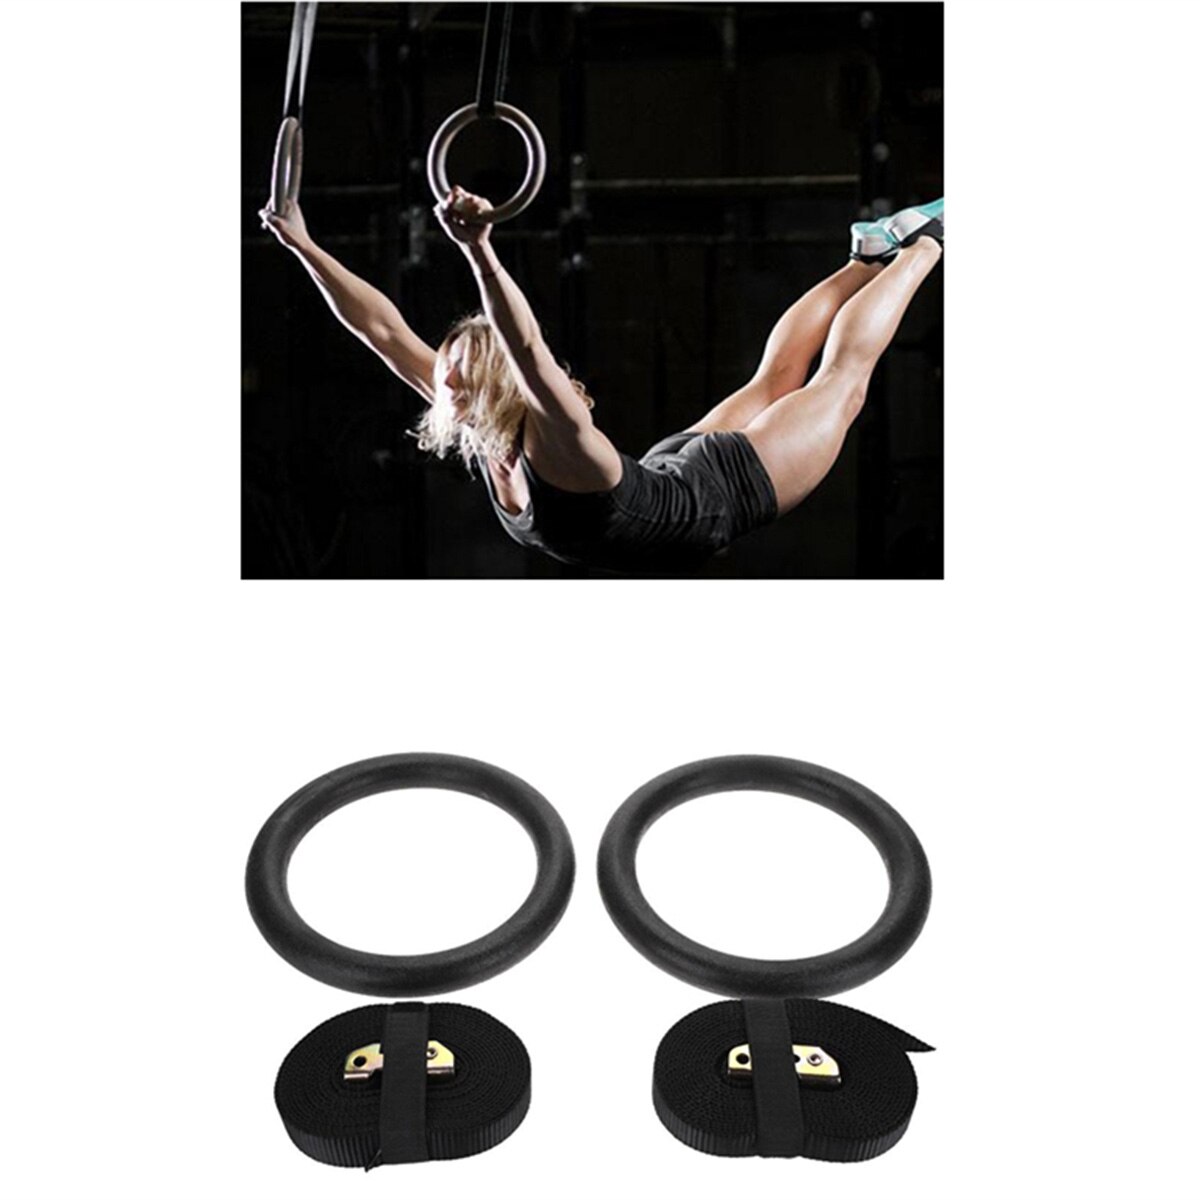 Gymnastic Gym Rings Black Adjustable Fitness Muscle Fitness Rings Strength Training Straps Hoop Fitness Equipment